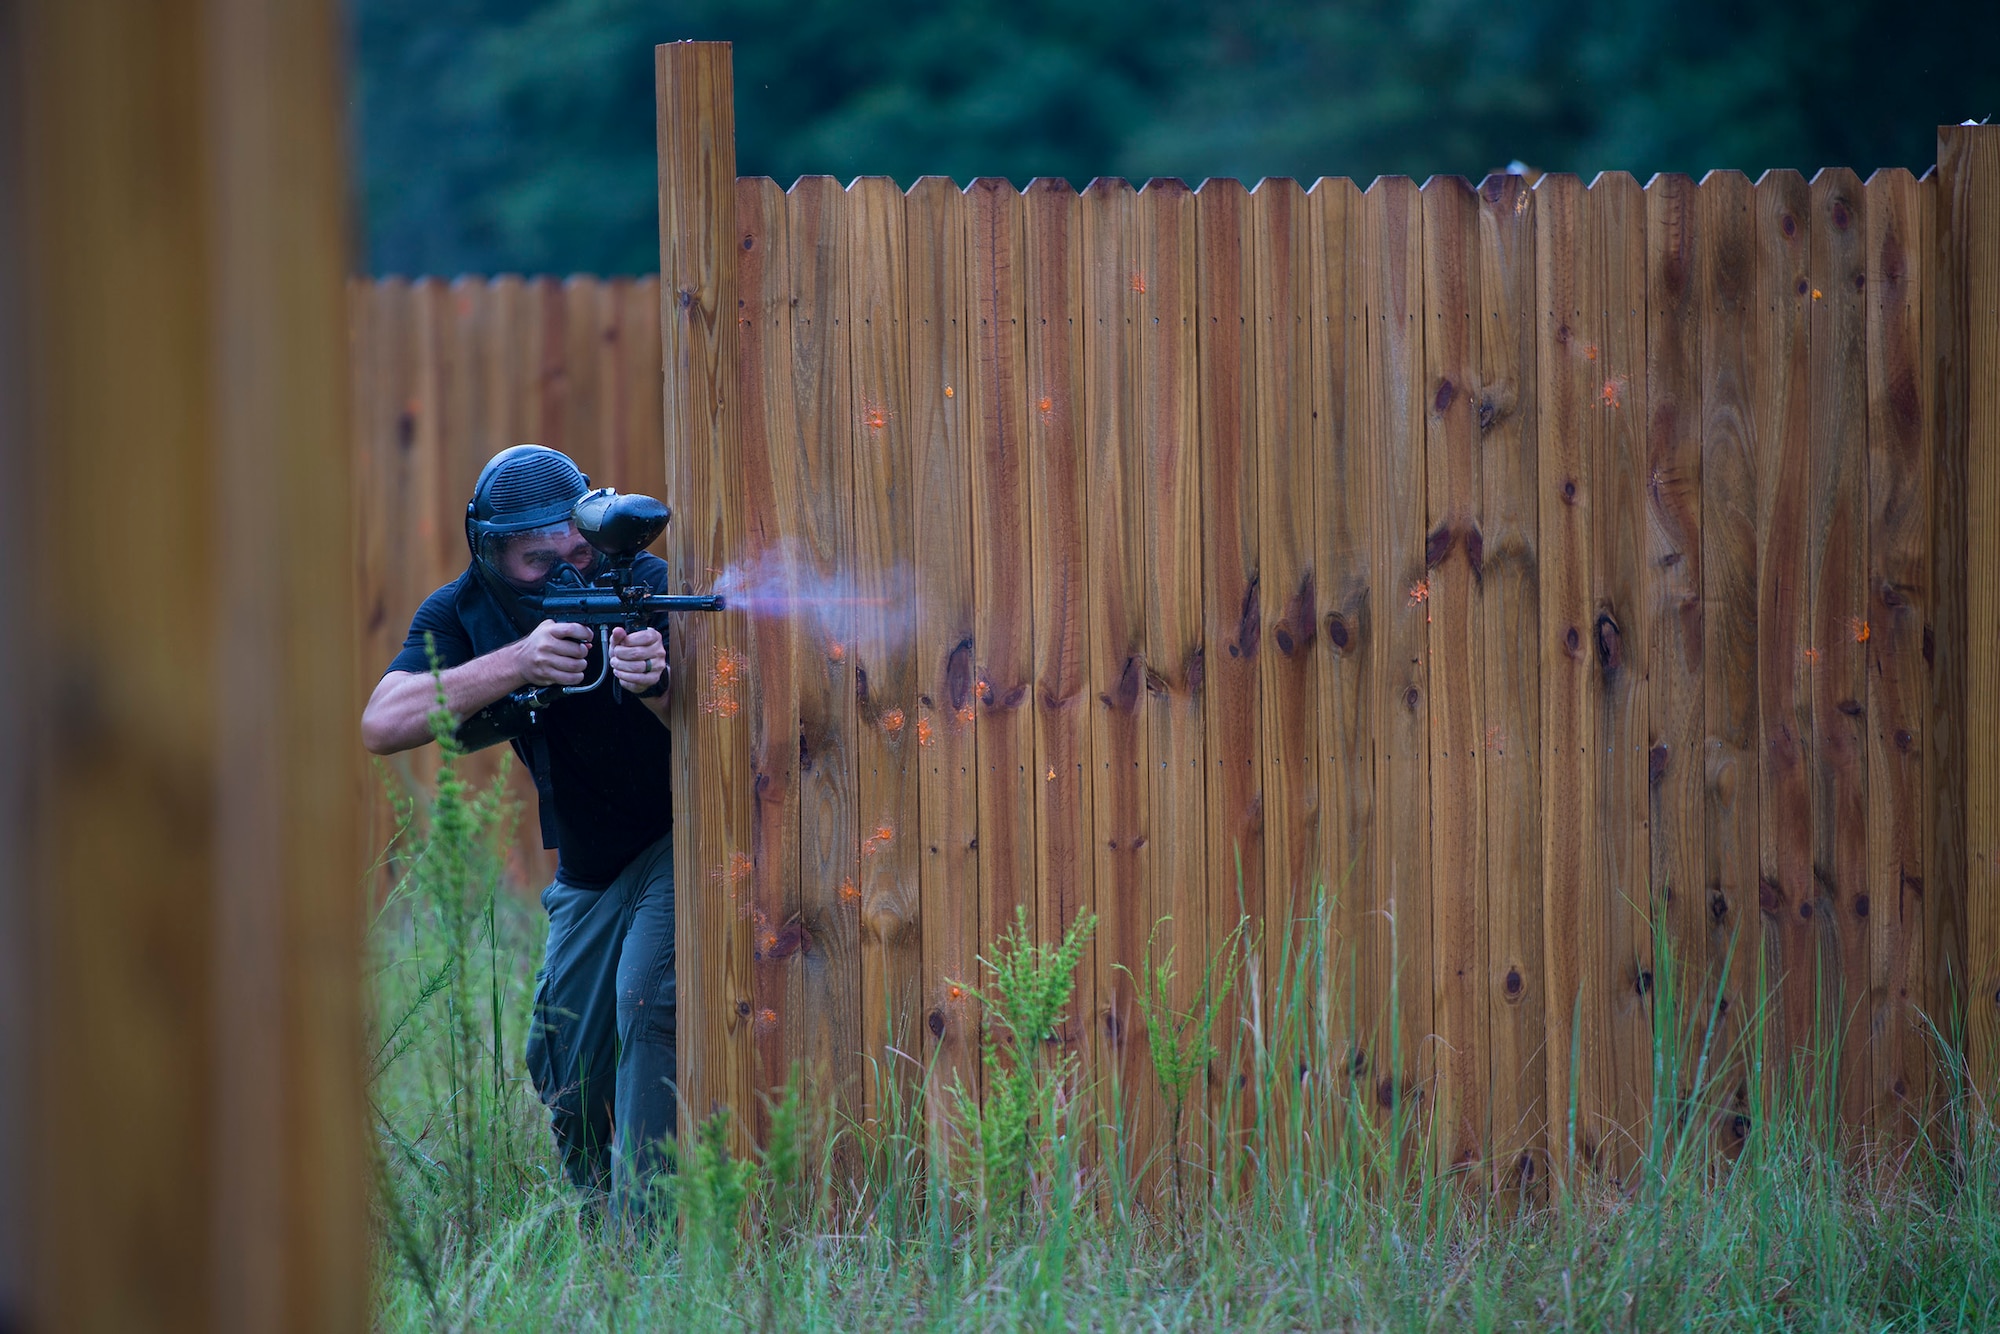 U.S. Air Force Capt. Peter Arnold, 71st Rescue Squadron HC-130 J Combat King II pilot, fires a paintball towards the opposition, during combat survival training, Sept. 13, 2016, at Moody Air Force Base, Ga. Airmen participated in multiple rounds of CST against an array of teams practicing different survival tactics to efficiently evade, resist and escape enemy threats.  (U.S. Air Force photo by Airman 1st Class Greg Nash)